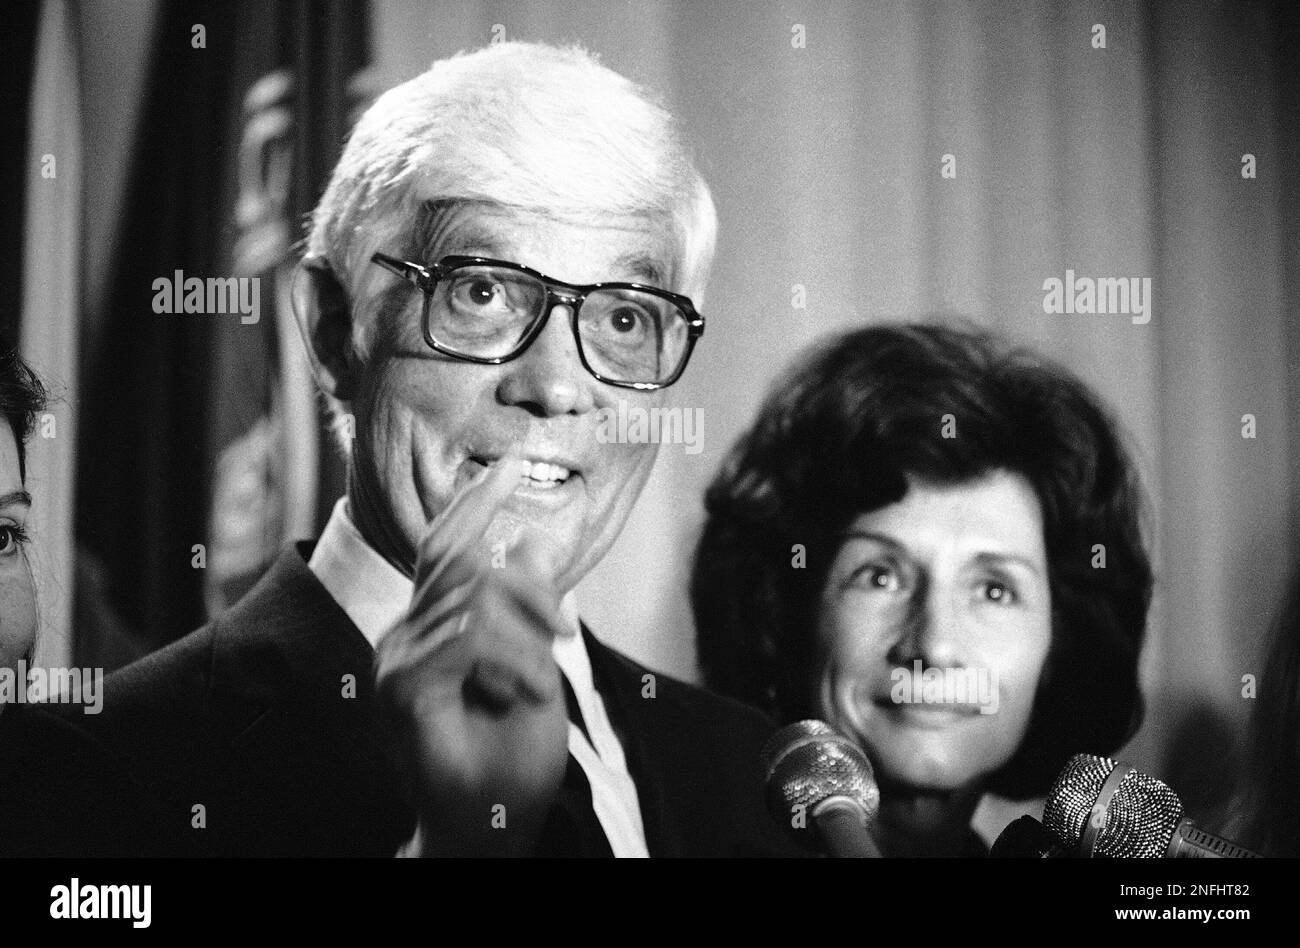 rep-john-b-anderson-of-illinois-is-joined-by-his-wife-keke-in-washington-on-thursday-april-24-1980-as-he-announces-that-he-will-pursue-the-presidency-of-the-united-states-as-an-independent-candidate-instead-of-a-republican-anderson-says-he-is-unfettered-by-party-positionsap-photo-bob-daugherty-2NFHT82.jpg